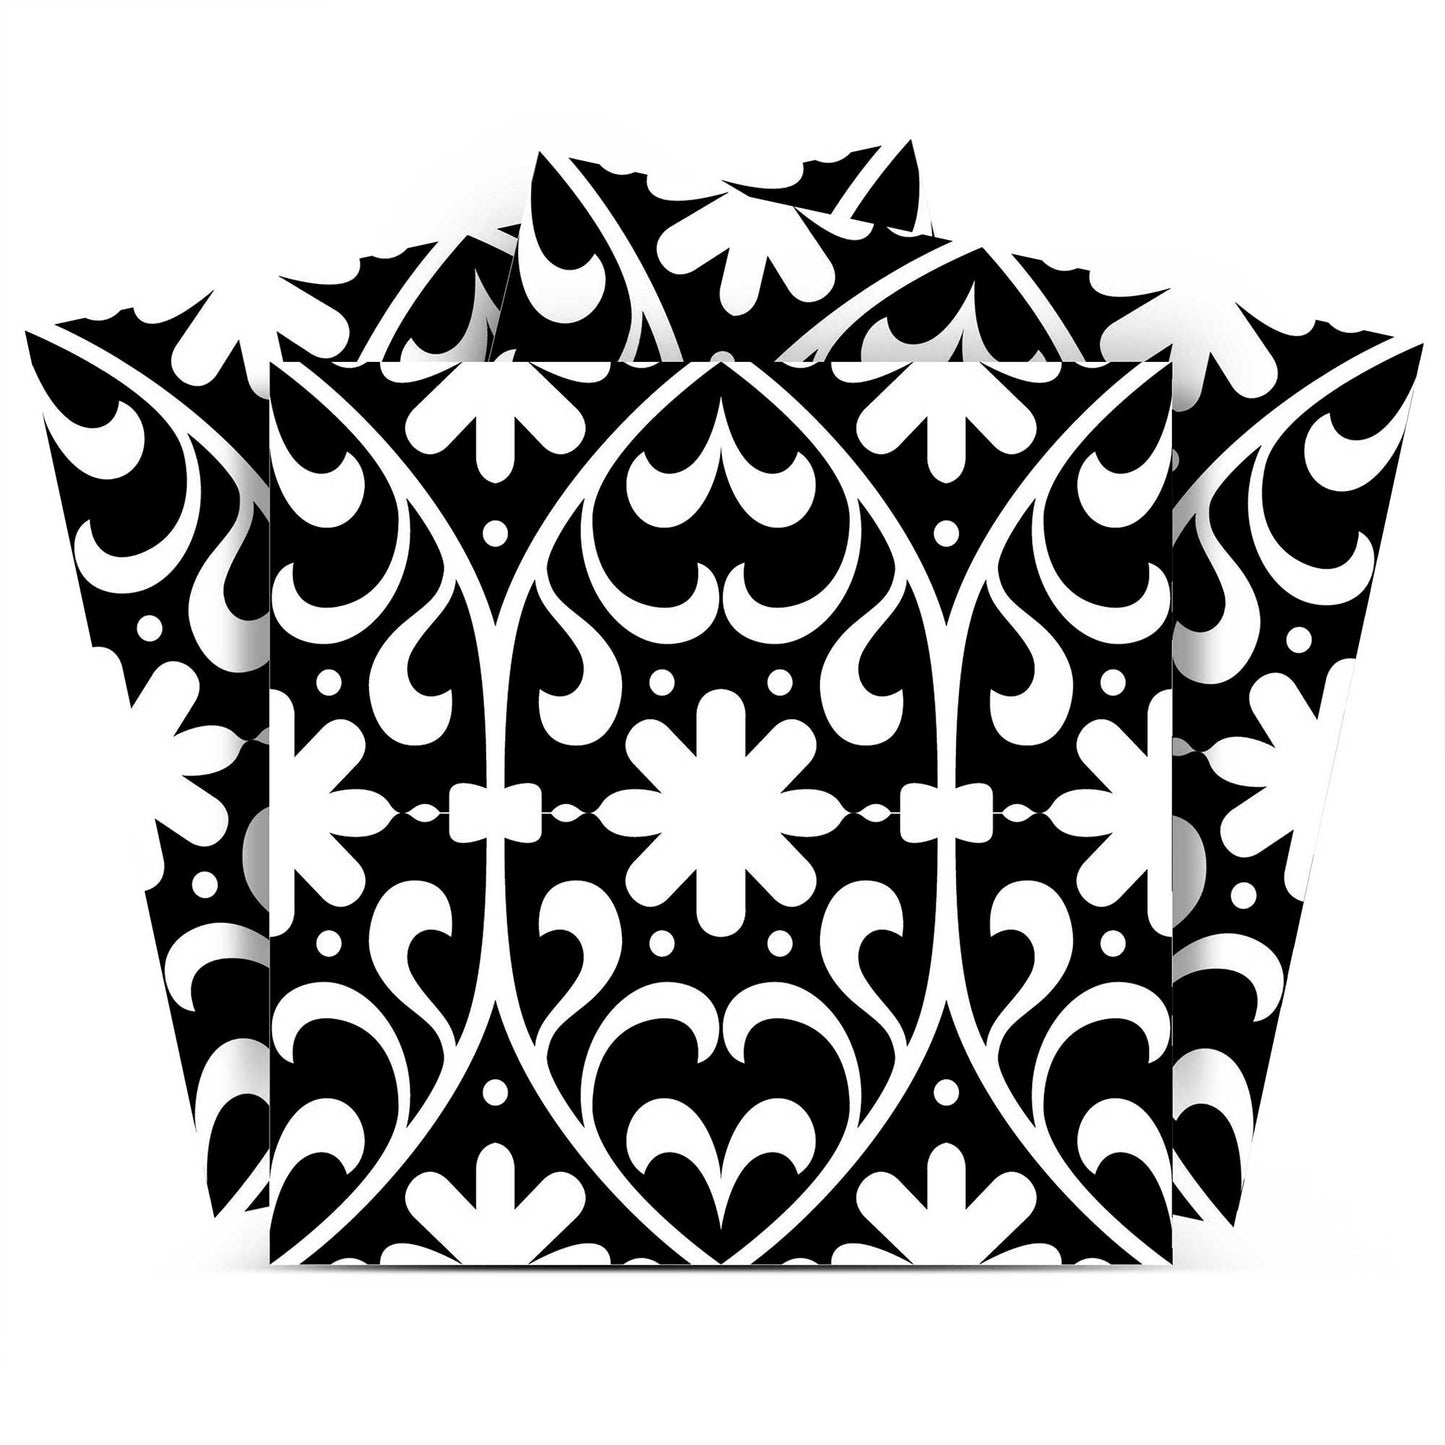 4" X 4" Black and White Floral Peel and Stick Removable Tiles